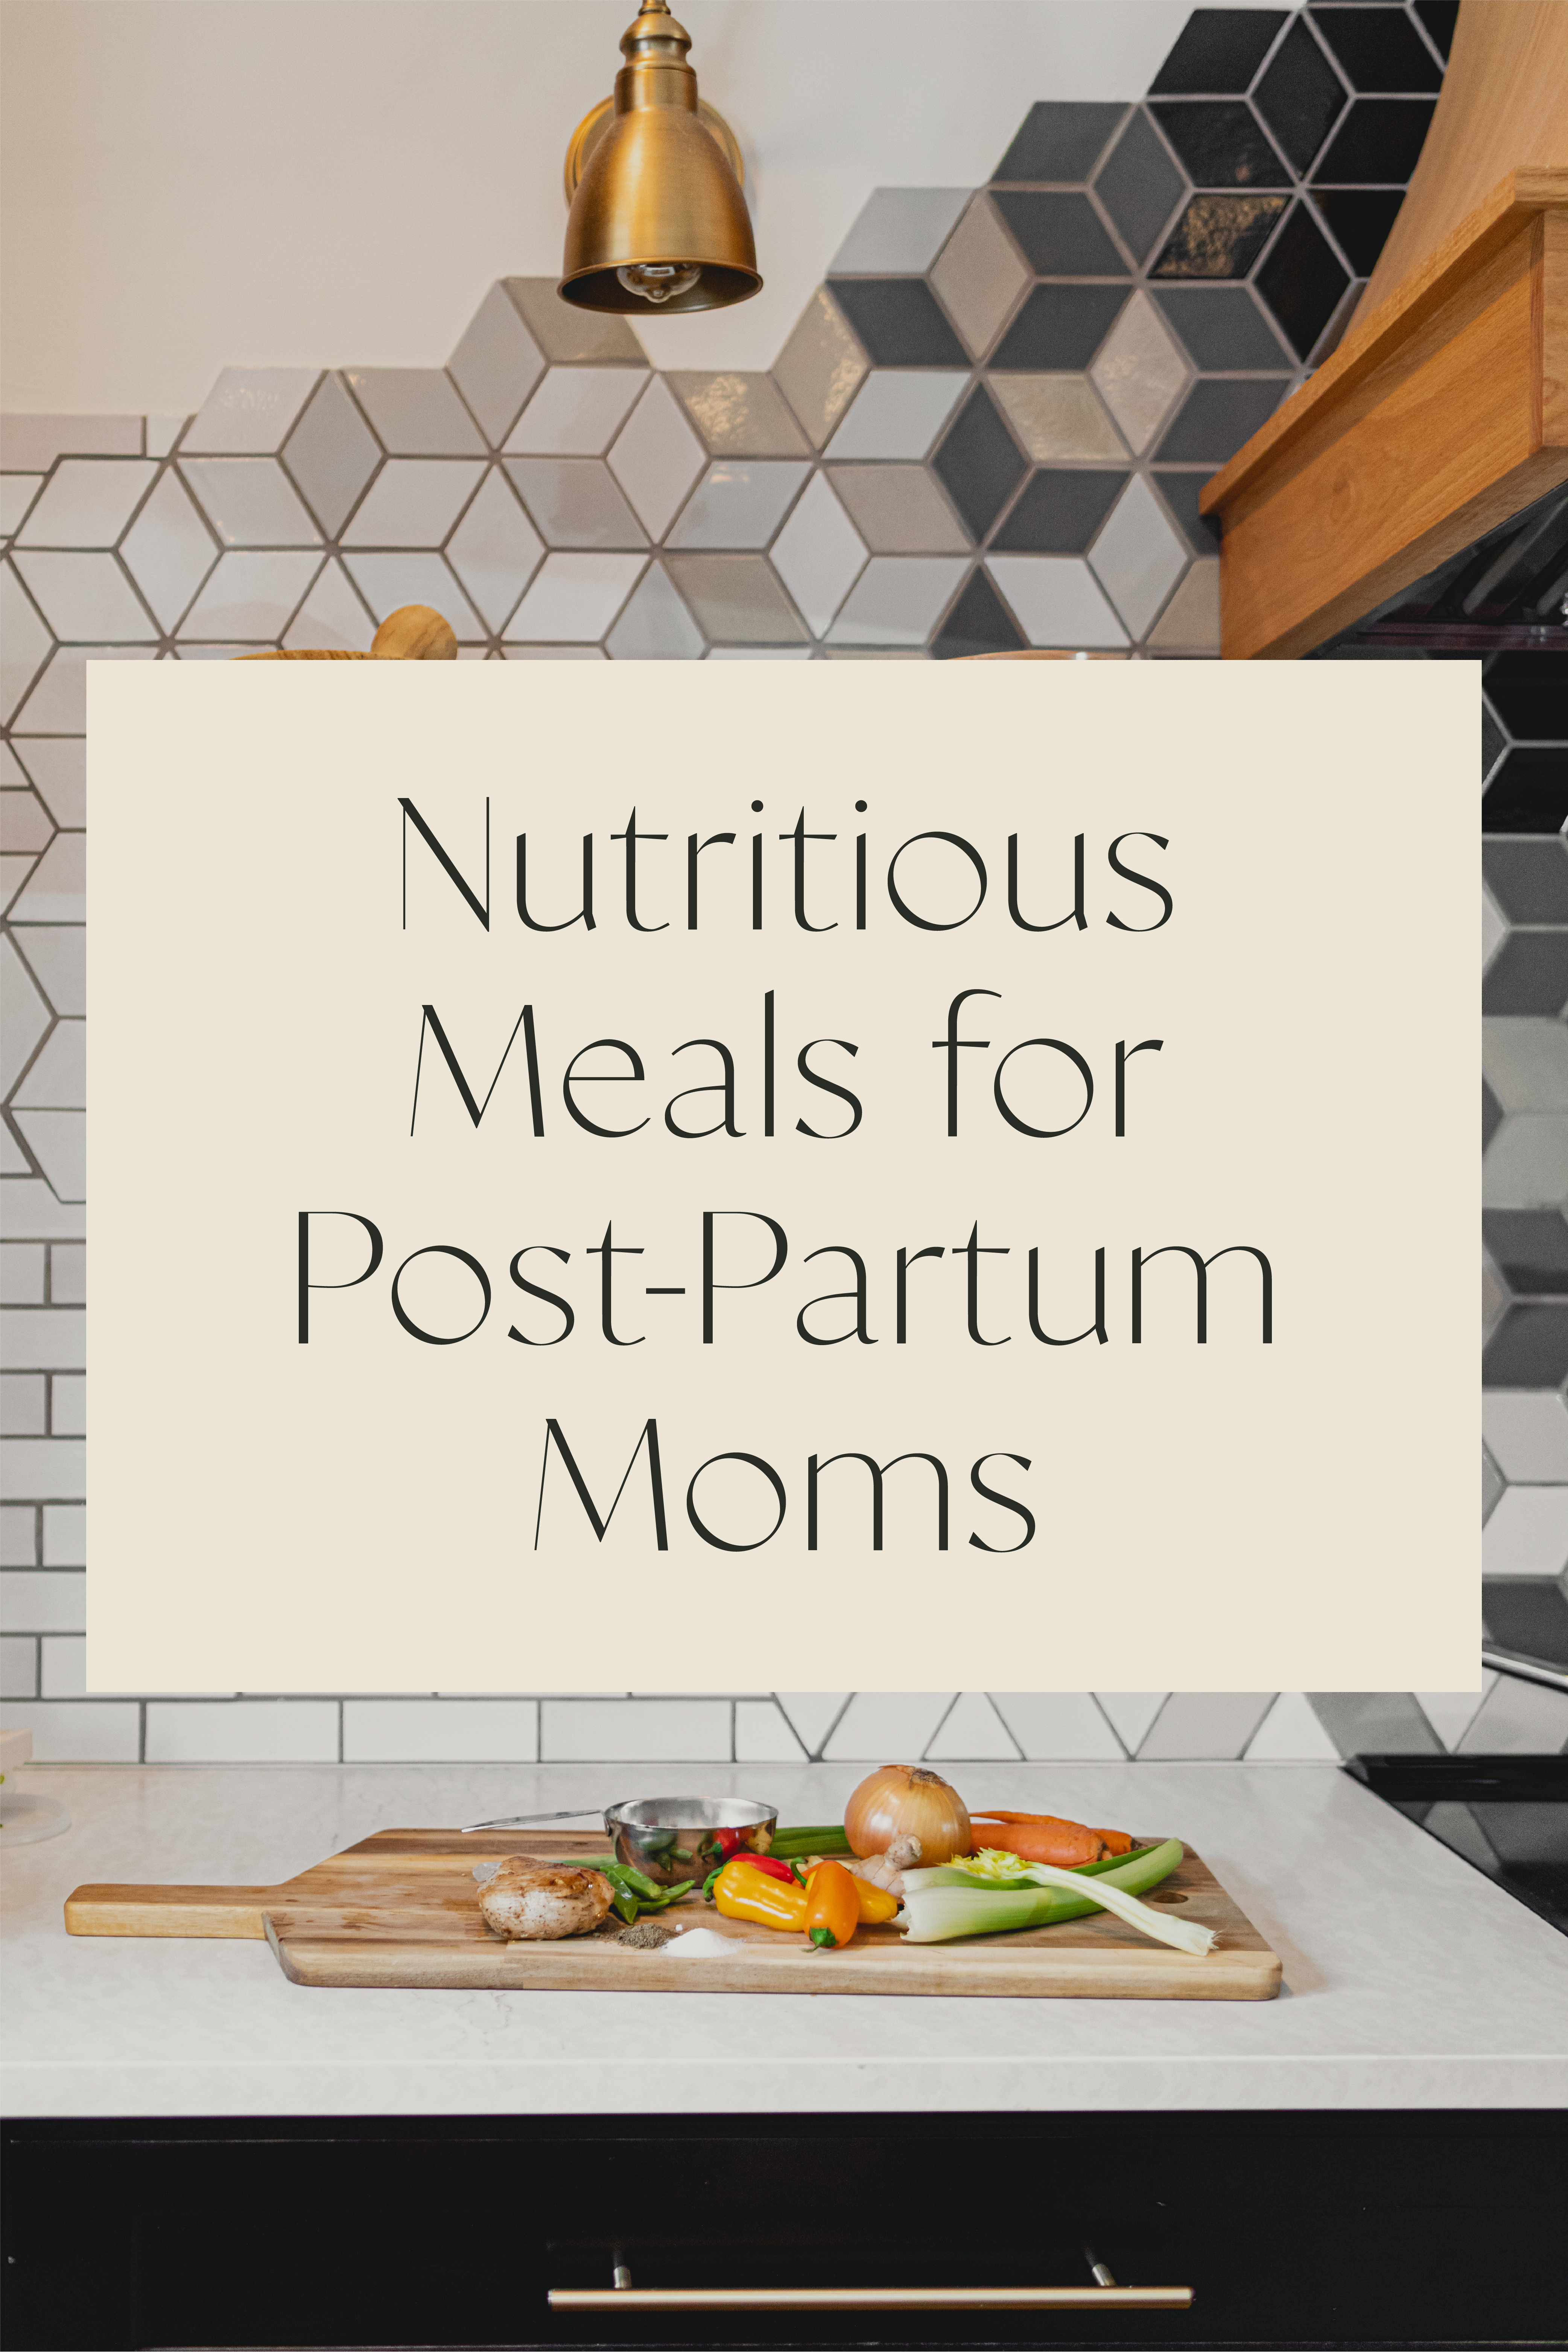 Three Nutritious Meals for Postpartum Moms 6